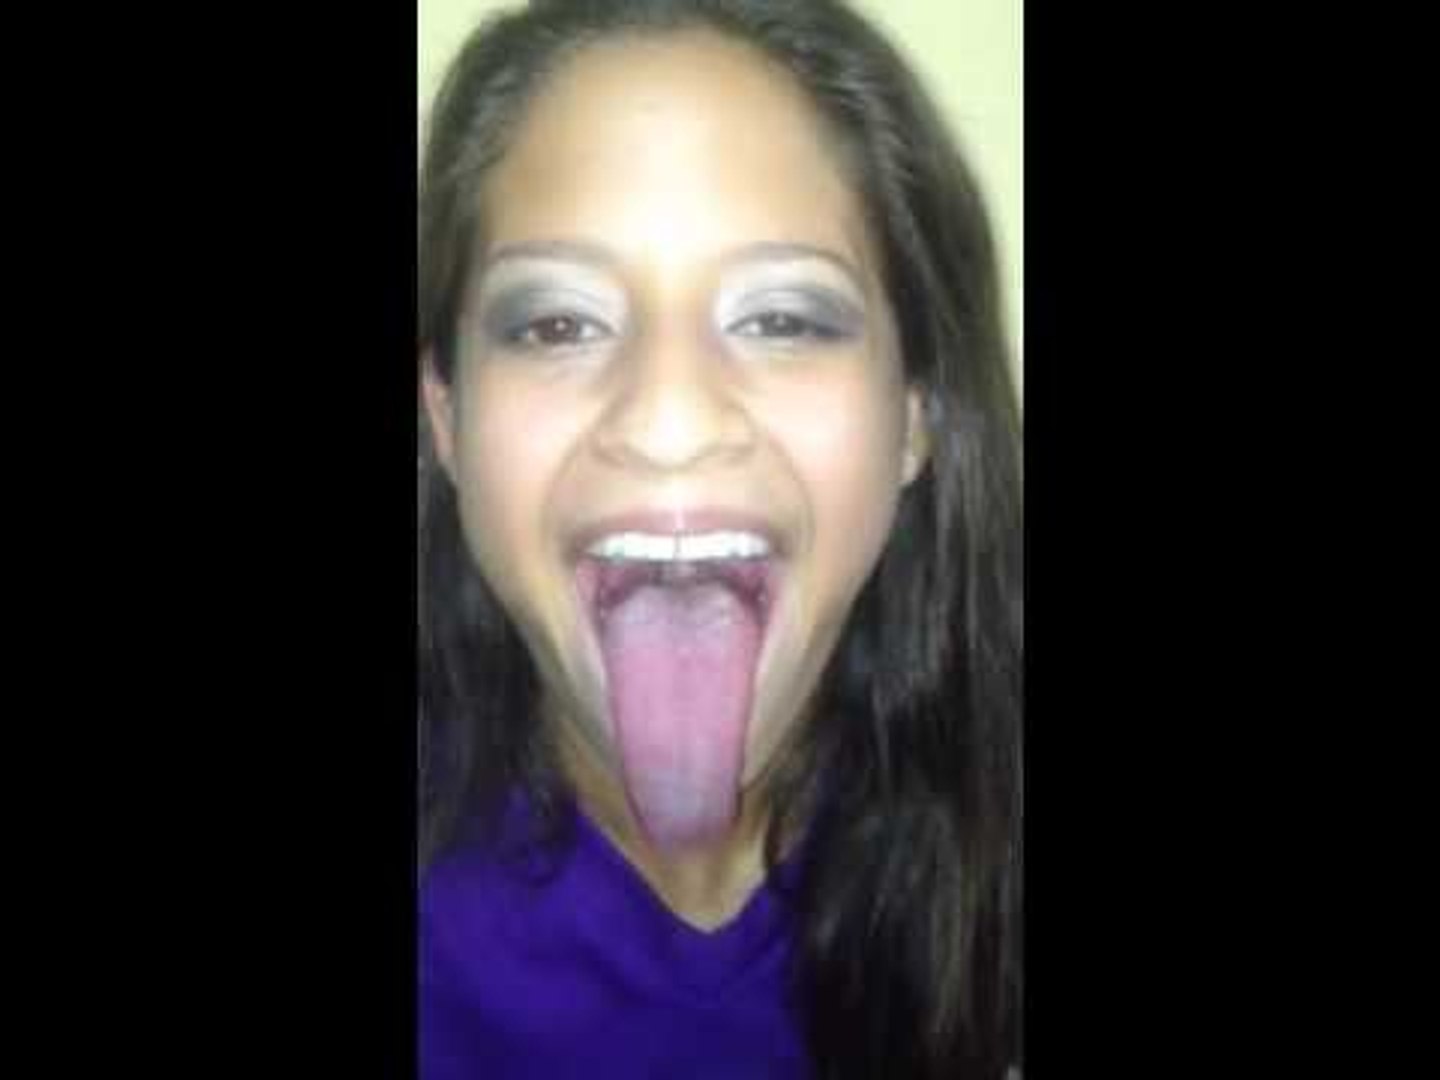 beaner bean recommends chick with long tongue pic